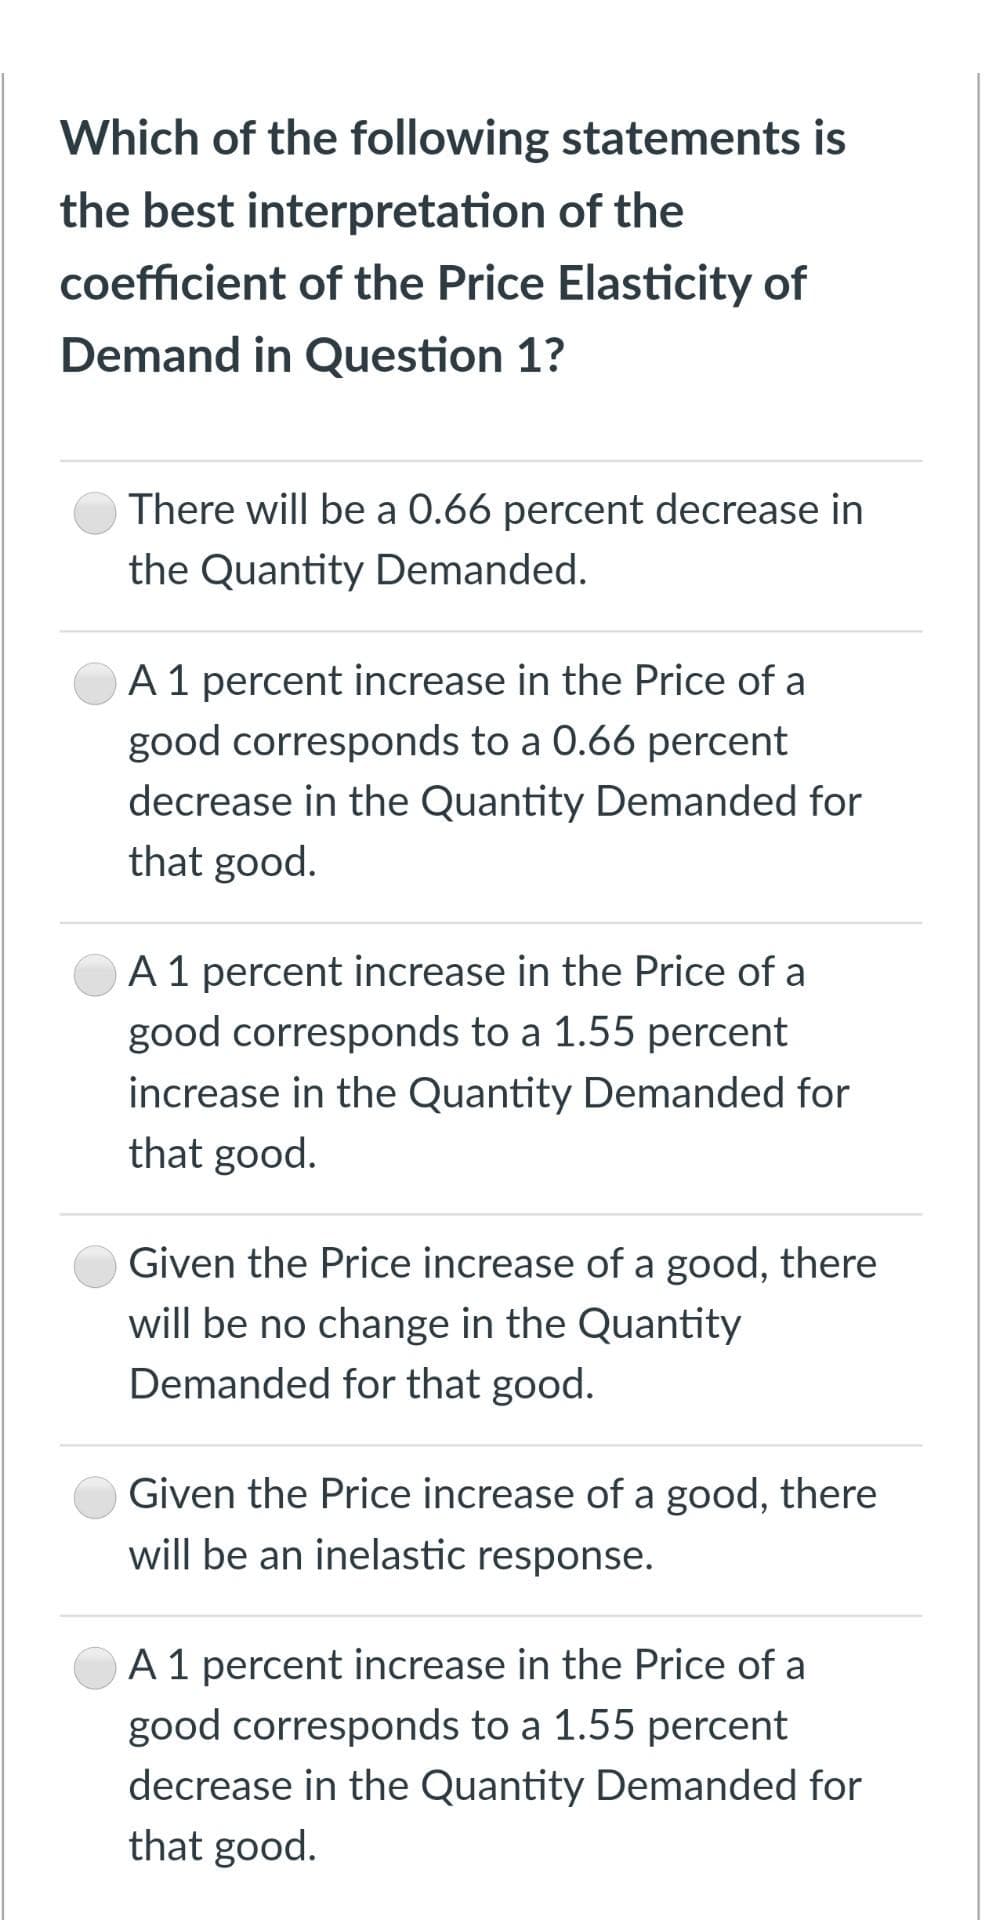 Which of the following statements is
the best interpretation of the
coefficient of the Price Elasticity of
Demand in Question 1?
There will be a 0.66 percent decrease in
the Quantity Demanded.
A 1 percent increase in the Price of a
good corresponds to a 0.66 percent
decrease in the Quantity Demanded for
that good.
A1 percent increase in the Price of a
good corresponds to a 1.55 percent
increase in the Quantity Demanded for
that good.
Given the Price increase of a good, there
will be no change in the Quantity
Demanded for that good.
Given the Price increase of a good, there
will be an inelastic response.
A 1 percent increase in the Price of a
good corresponds to a 1.55 percent
decrease in the Quantity Demanded for
that good.
